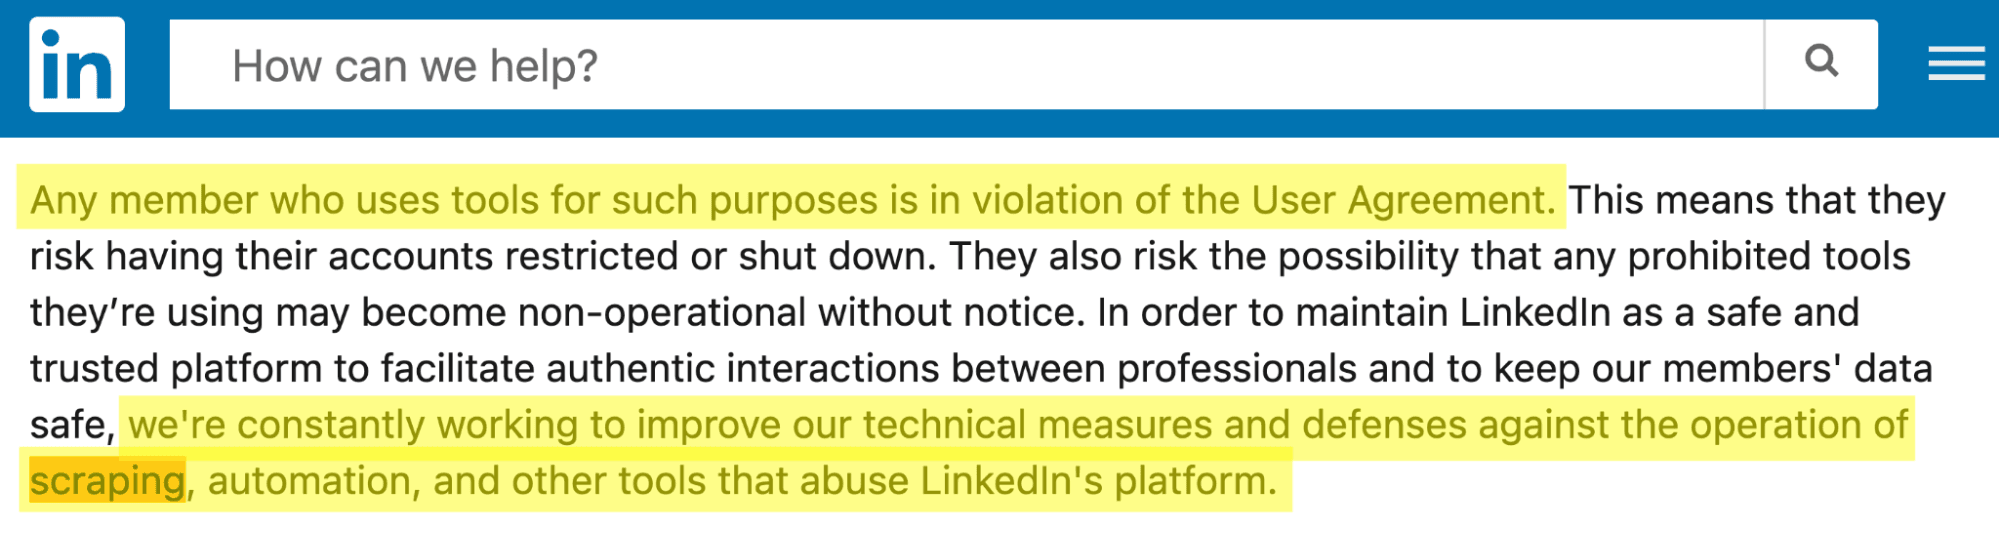 linkedin terms of use scraping forbidden - image20.png